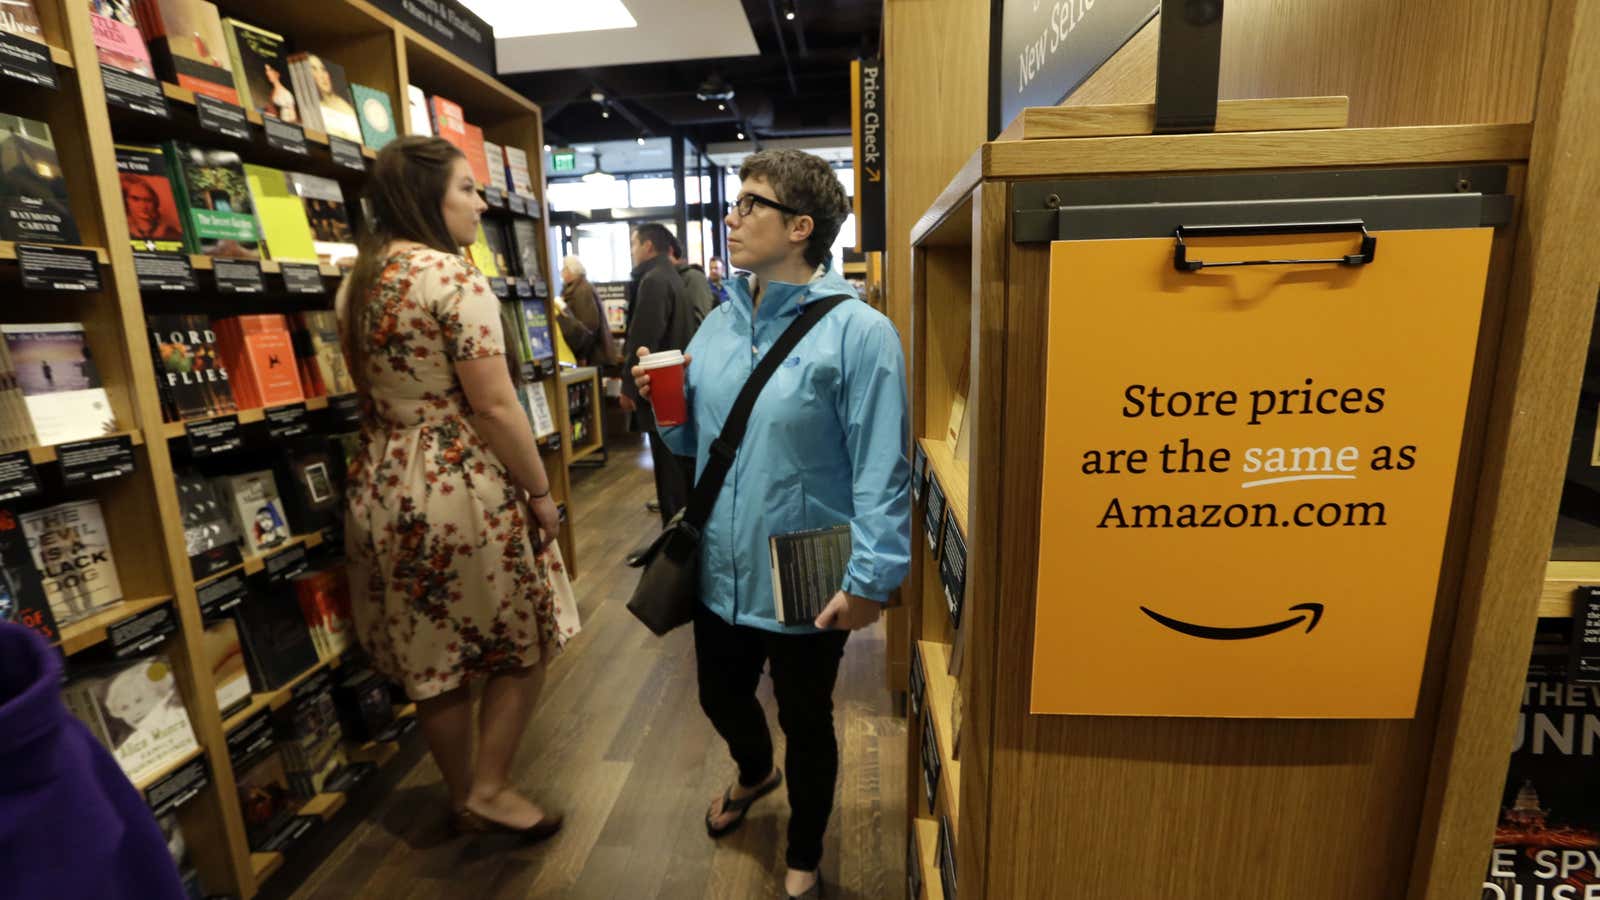 Another foray into brick-and-mortar retail, Amazon’s bookstore in Seattle.